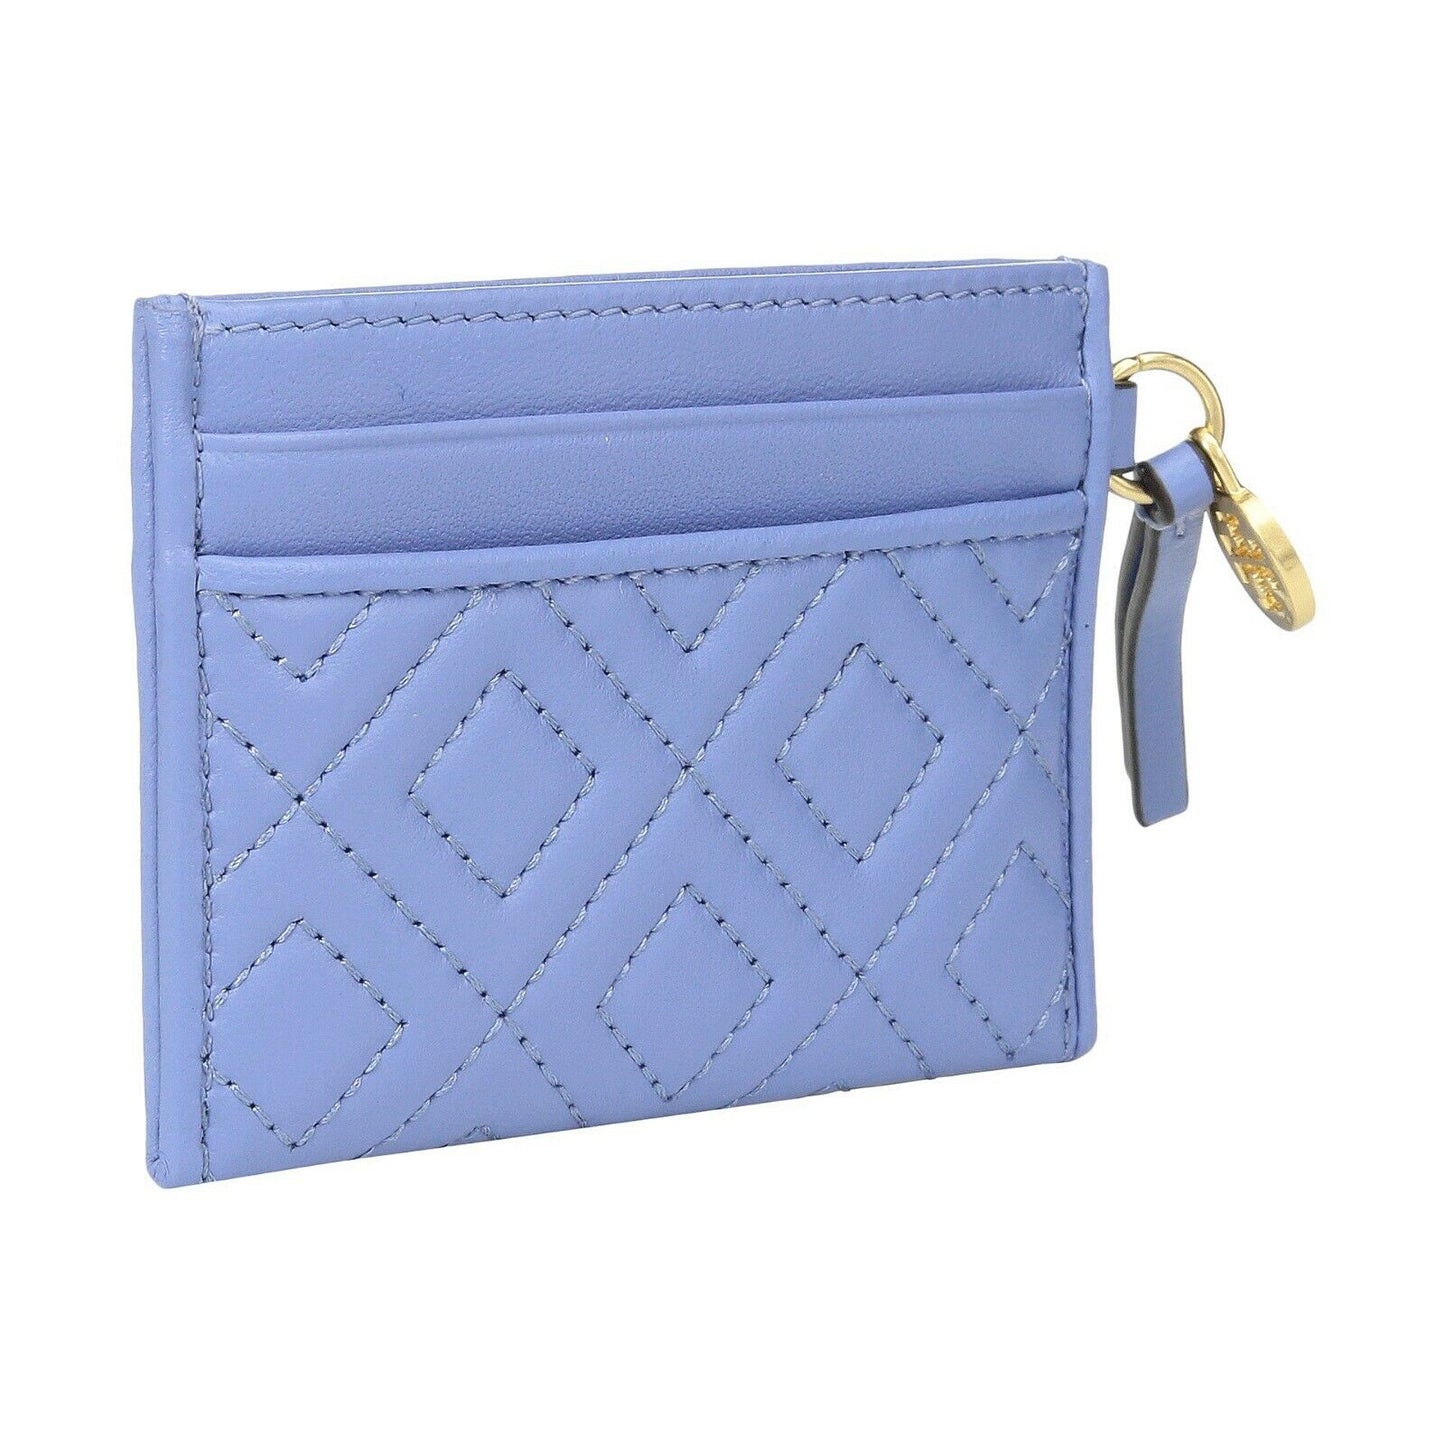 Tory Burch Fleming Larkspur Quilted Leather Card Coin Case Mini Key Wallet NWT